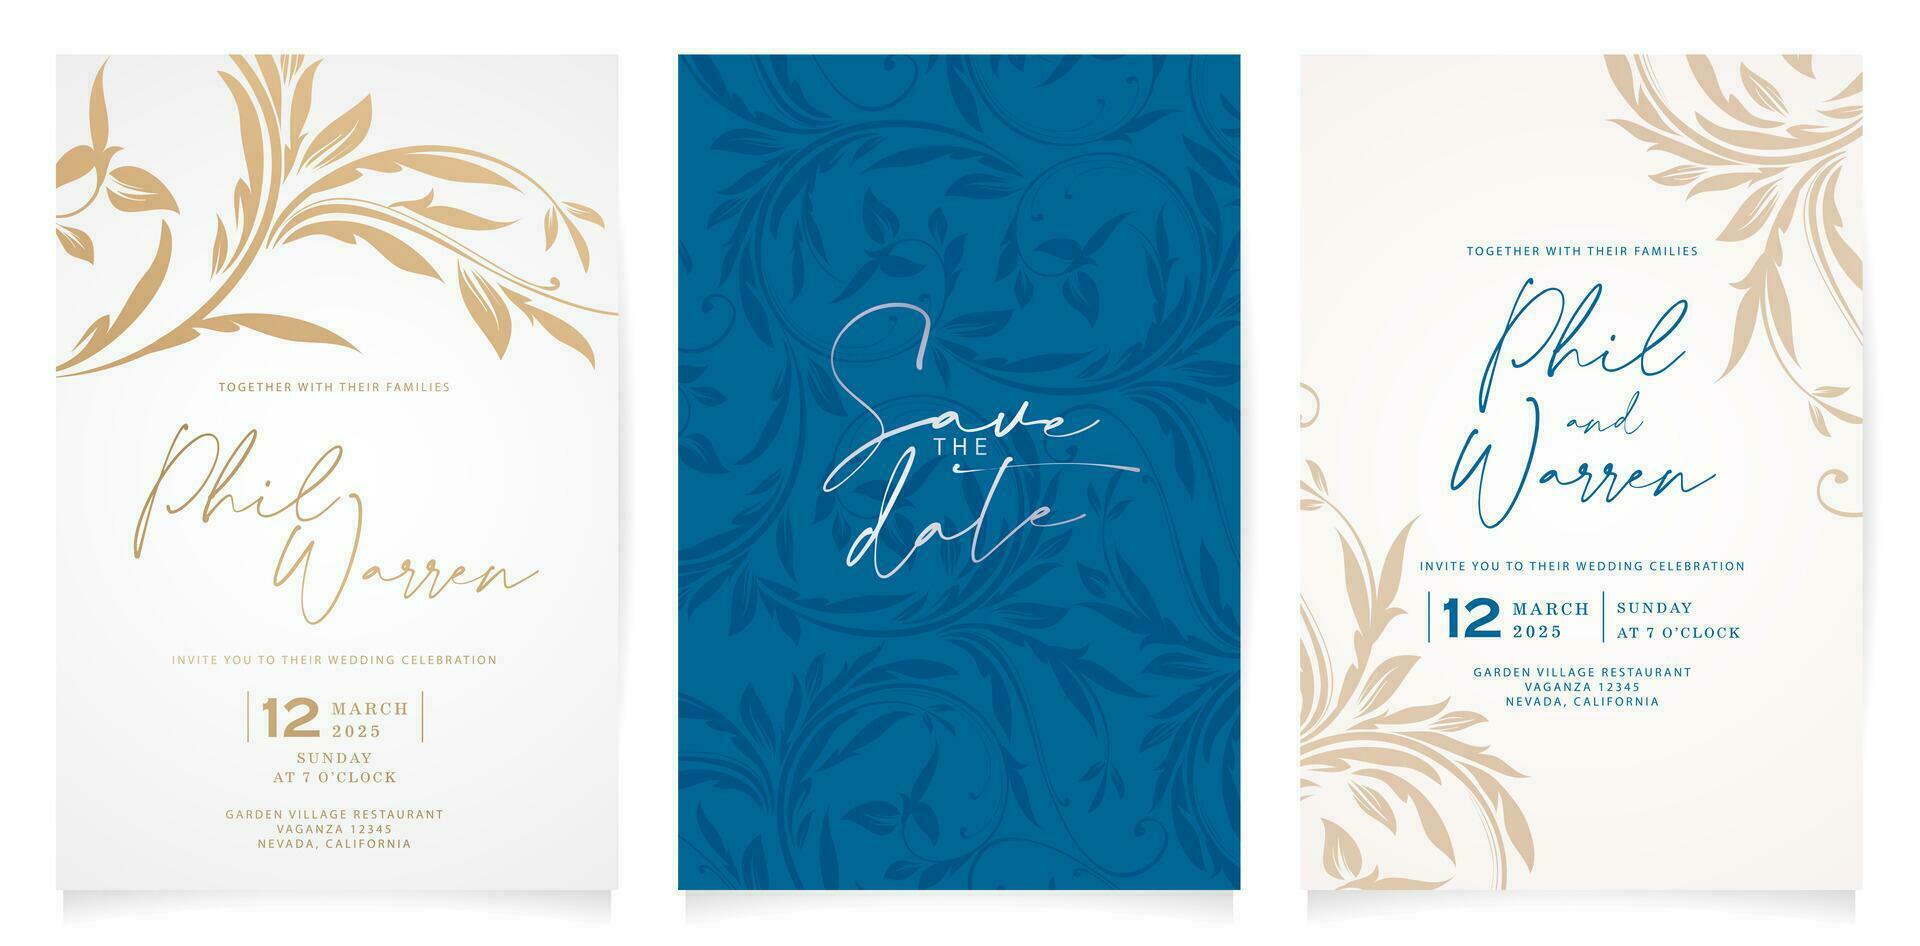 wedding invitation card with golden leaves ornate floral decorative three set minimalist styles for greetings cards template, Stationery, Layout, collage, scene designs, event flyers, prints materials vector